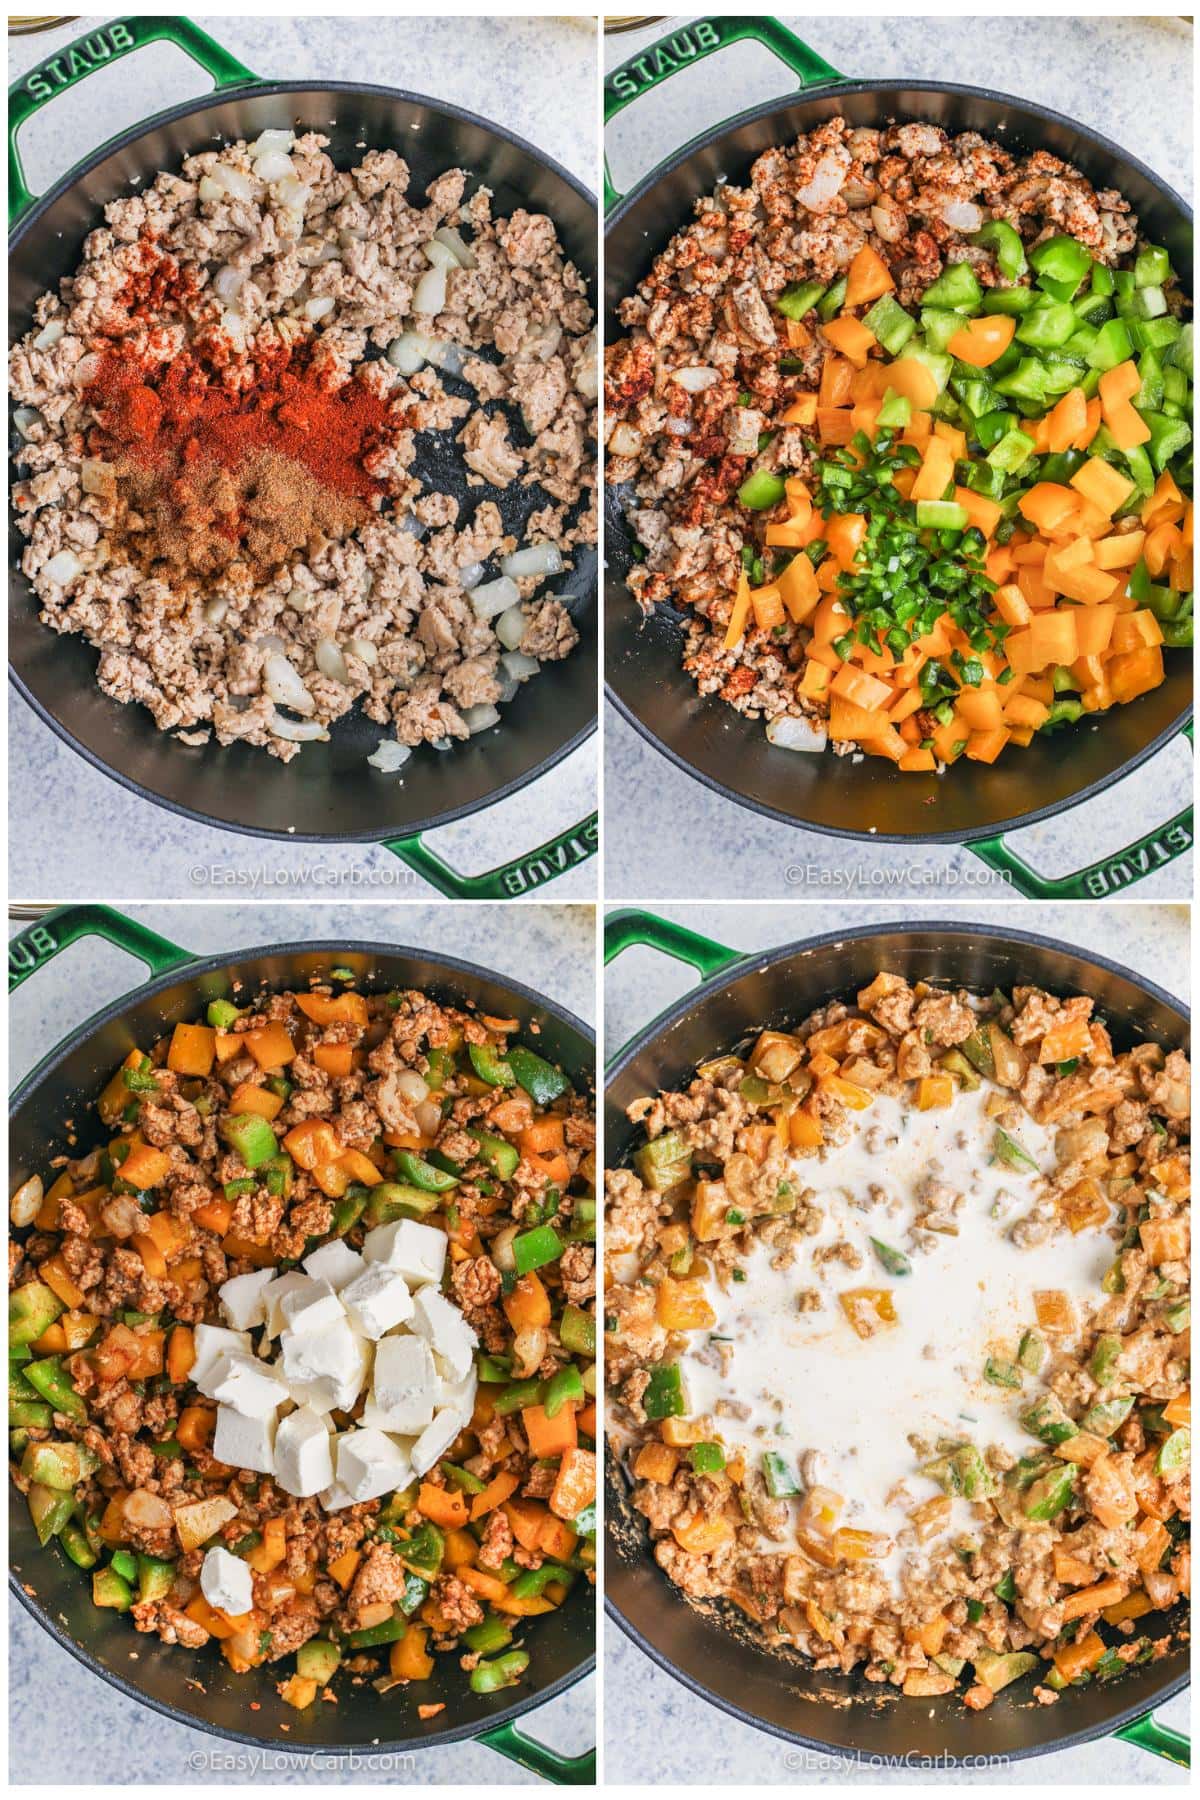 process of adding ingredients together to make Keto White Chicken Chili